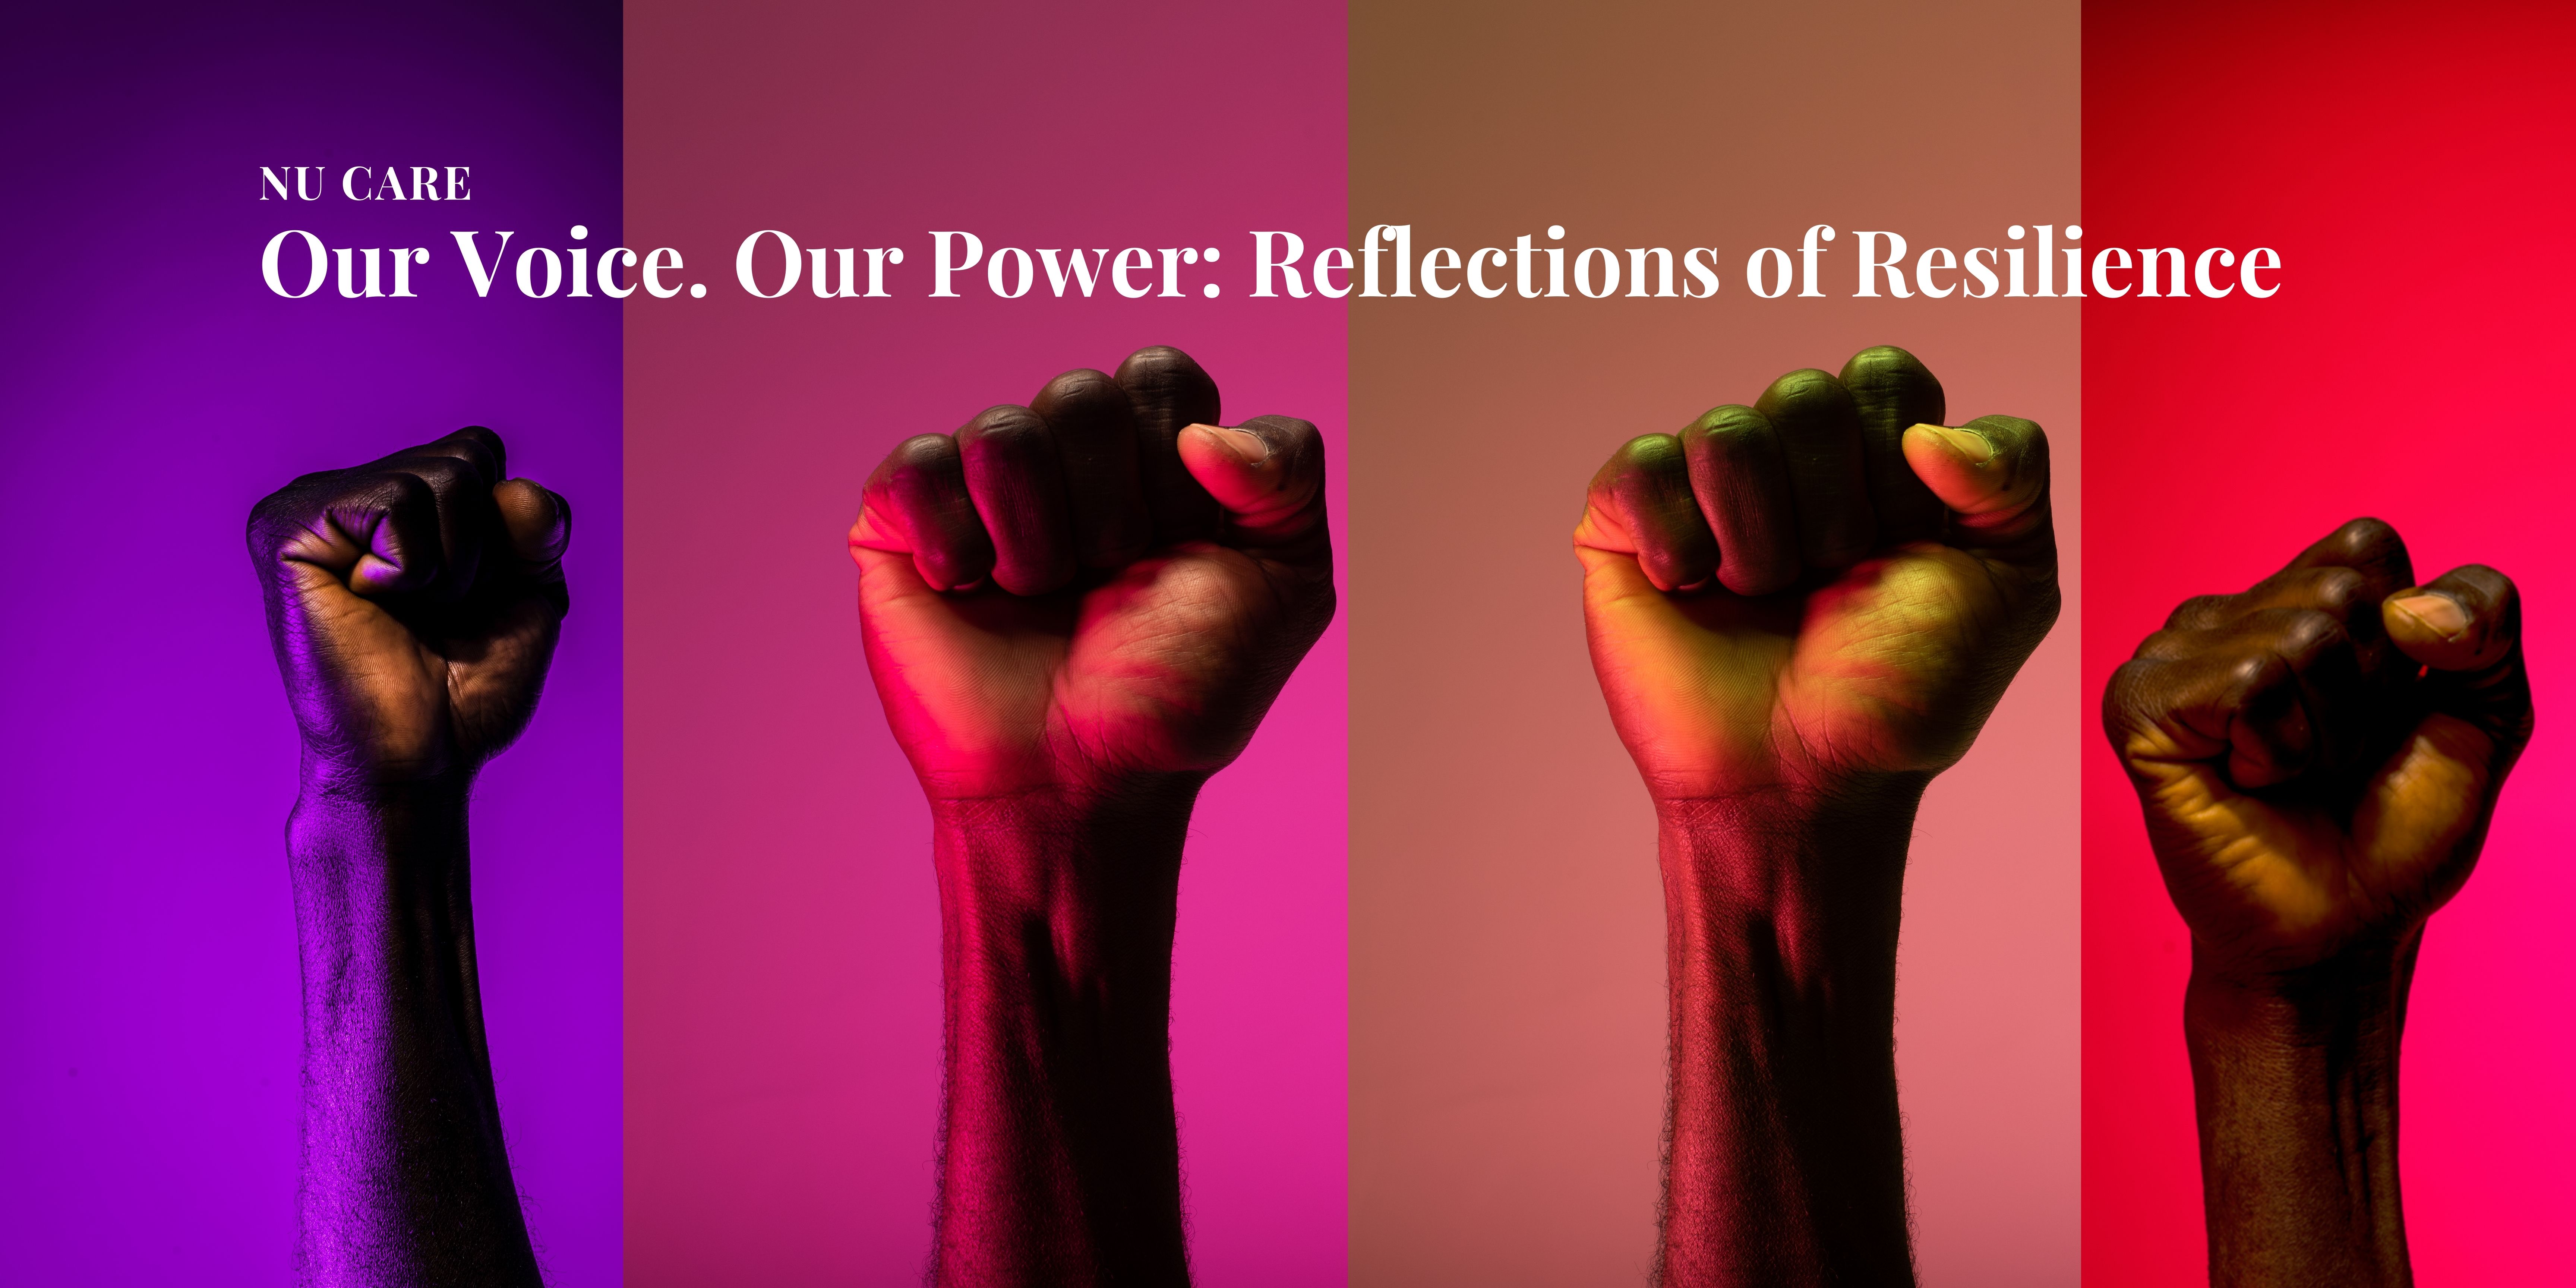 Event 1: Our Voice. Our Power Open Call